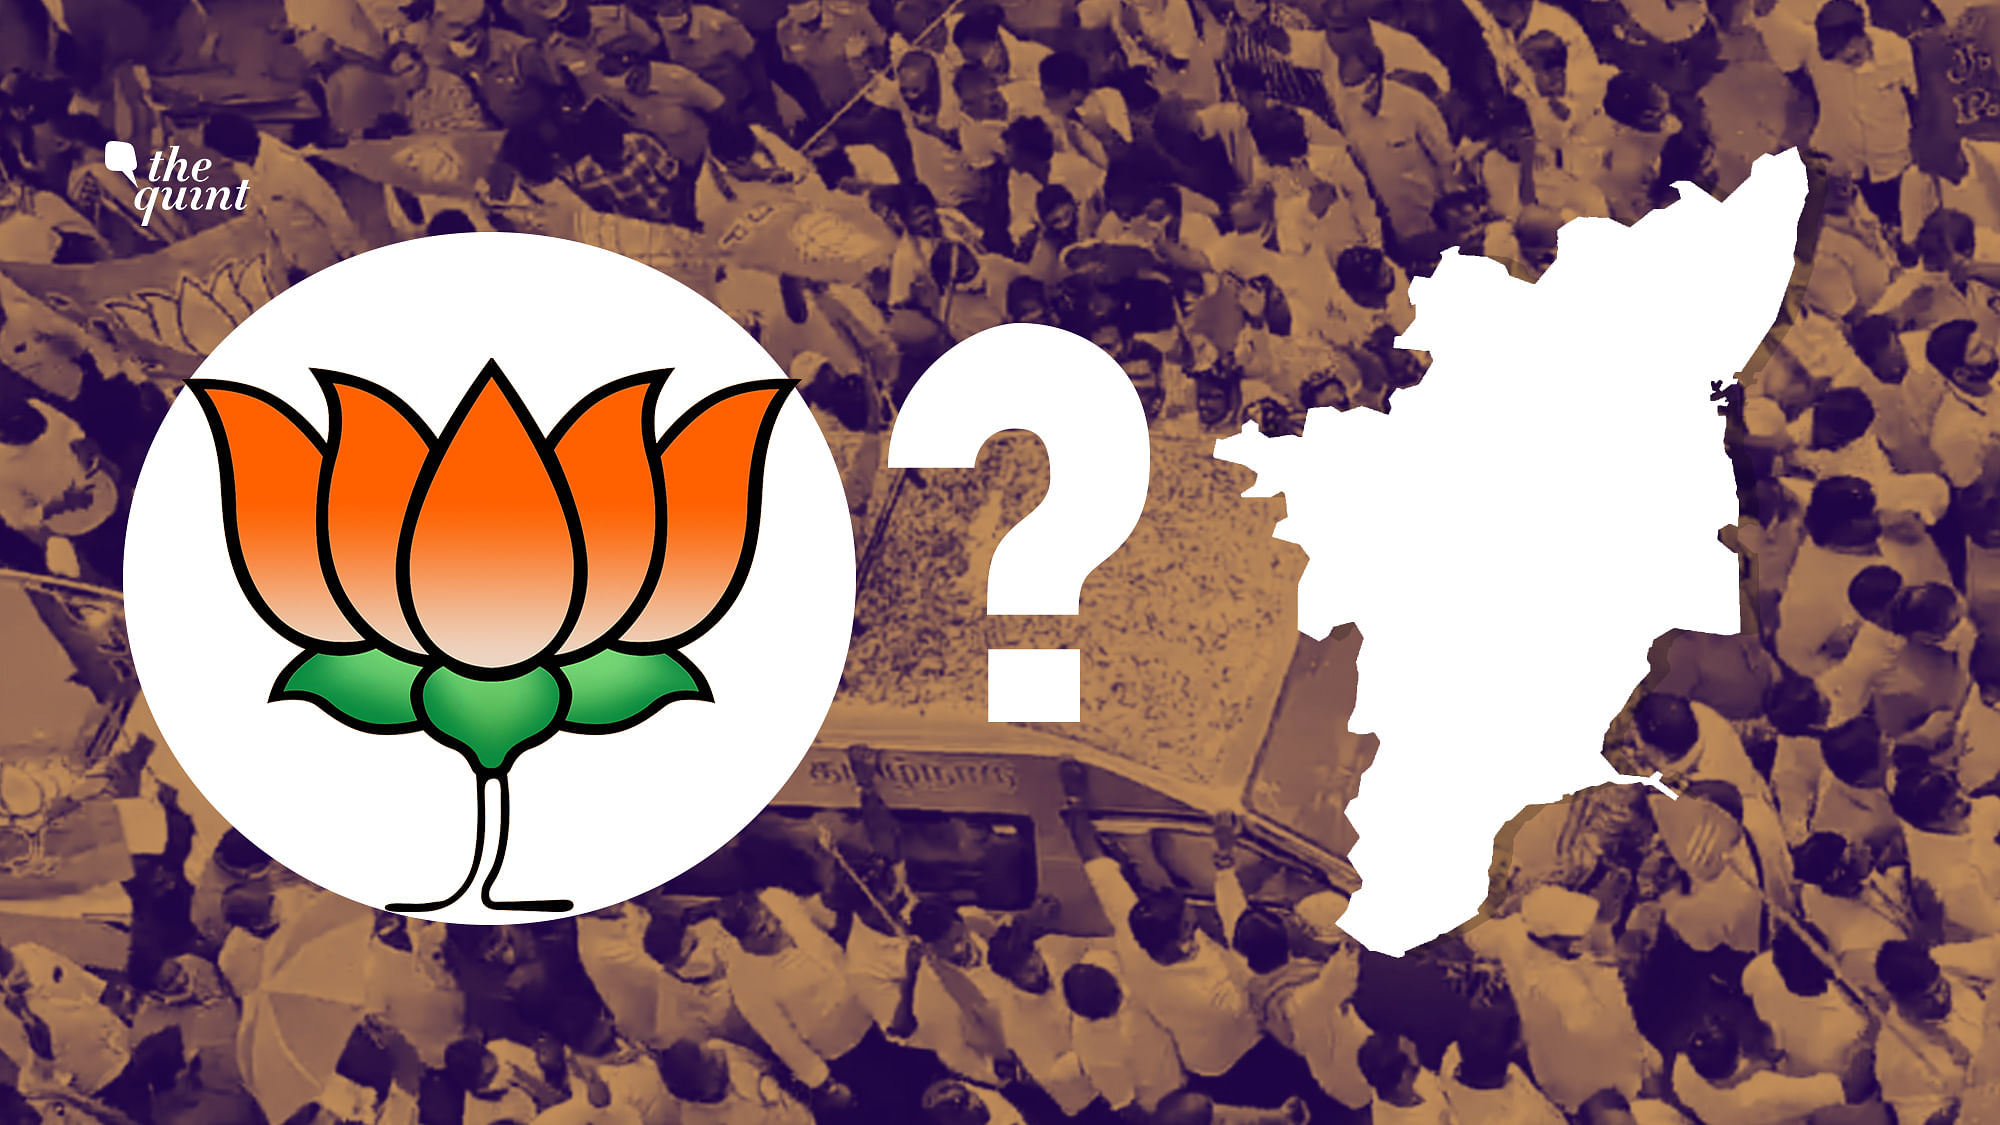 BJP might have succeeded in consolidating majority of the country, but when it comes to Tamil Nadu, they have not made even a dent.